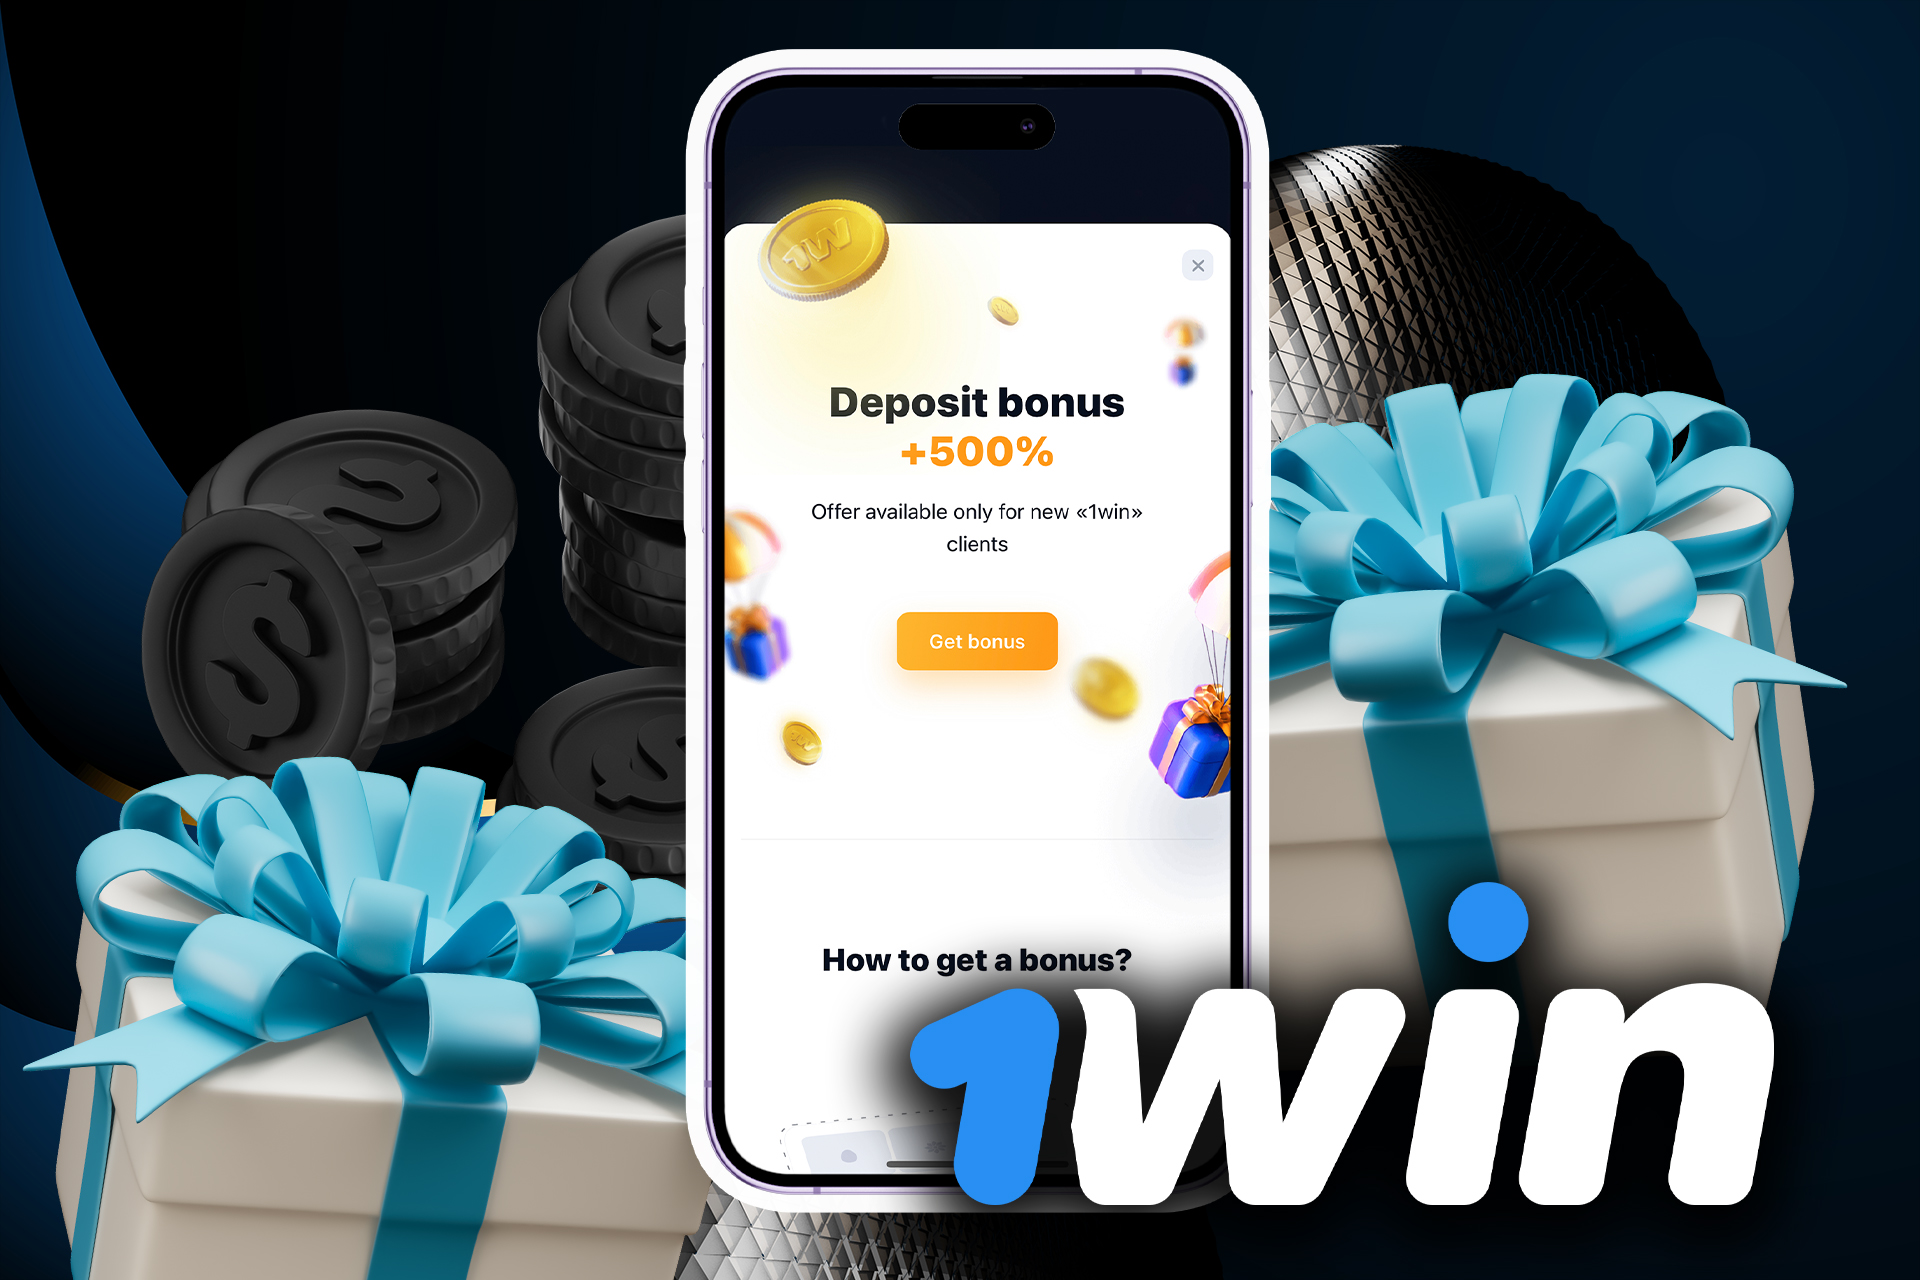 Get a 500% welcome bonus after the first deposit in the 1win app.